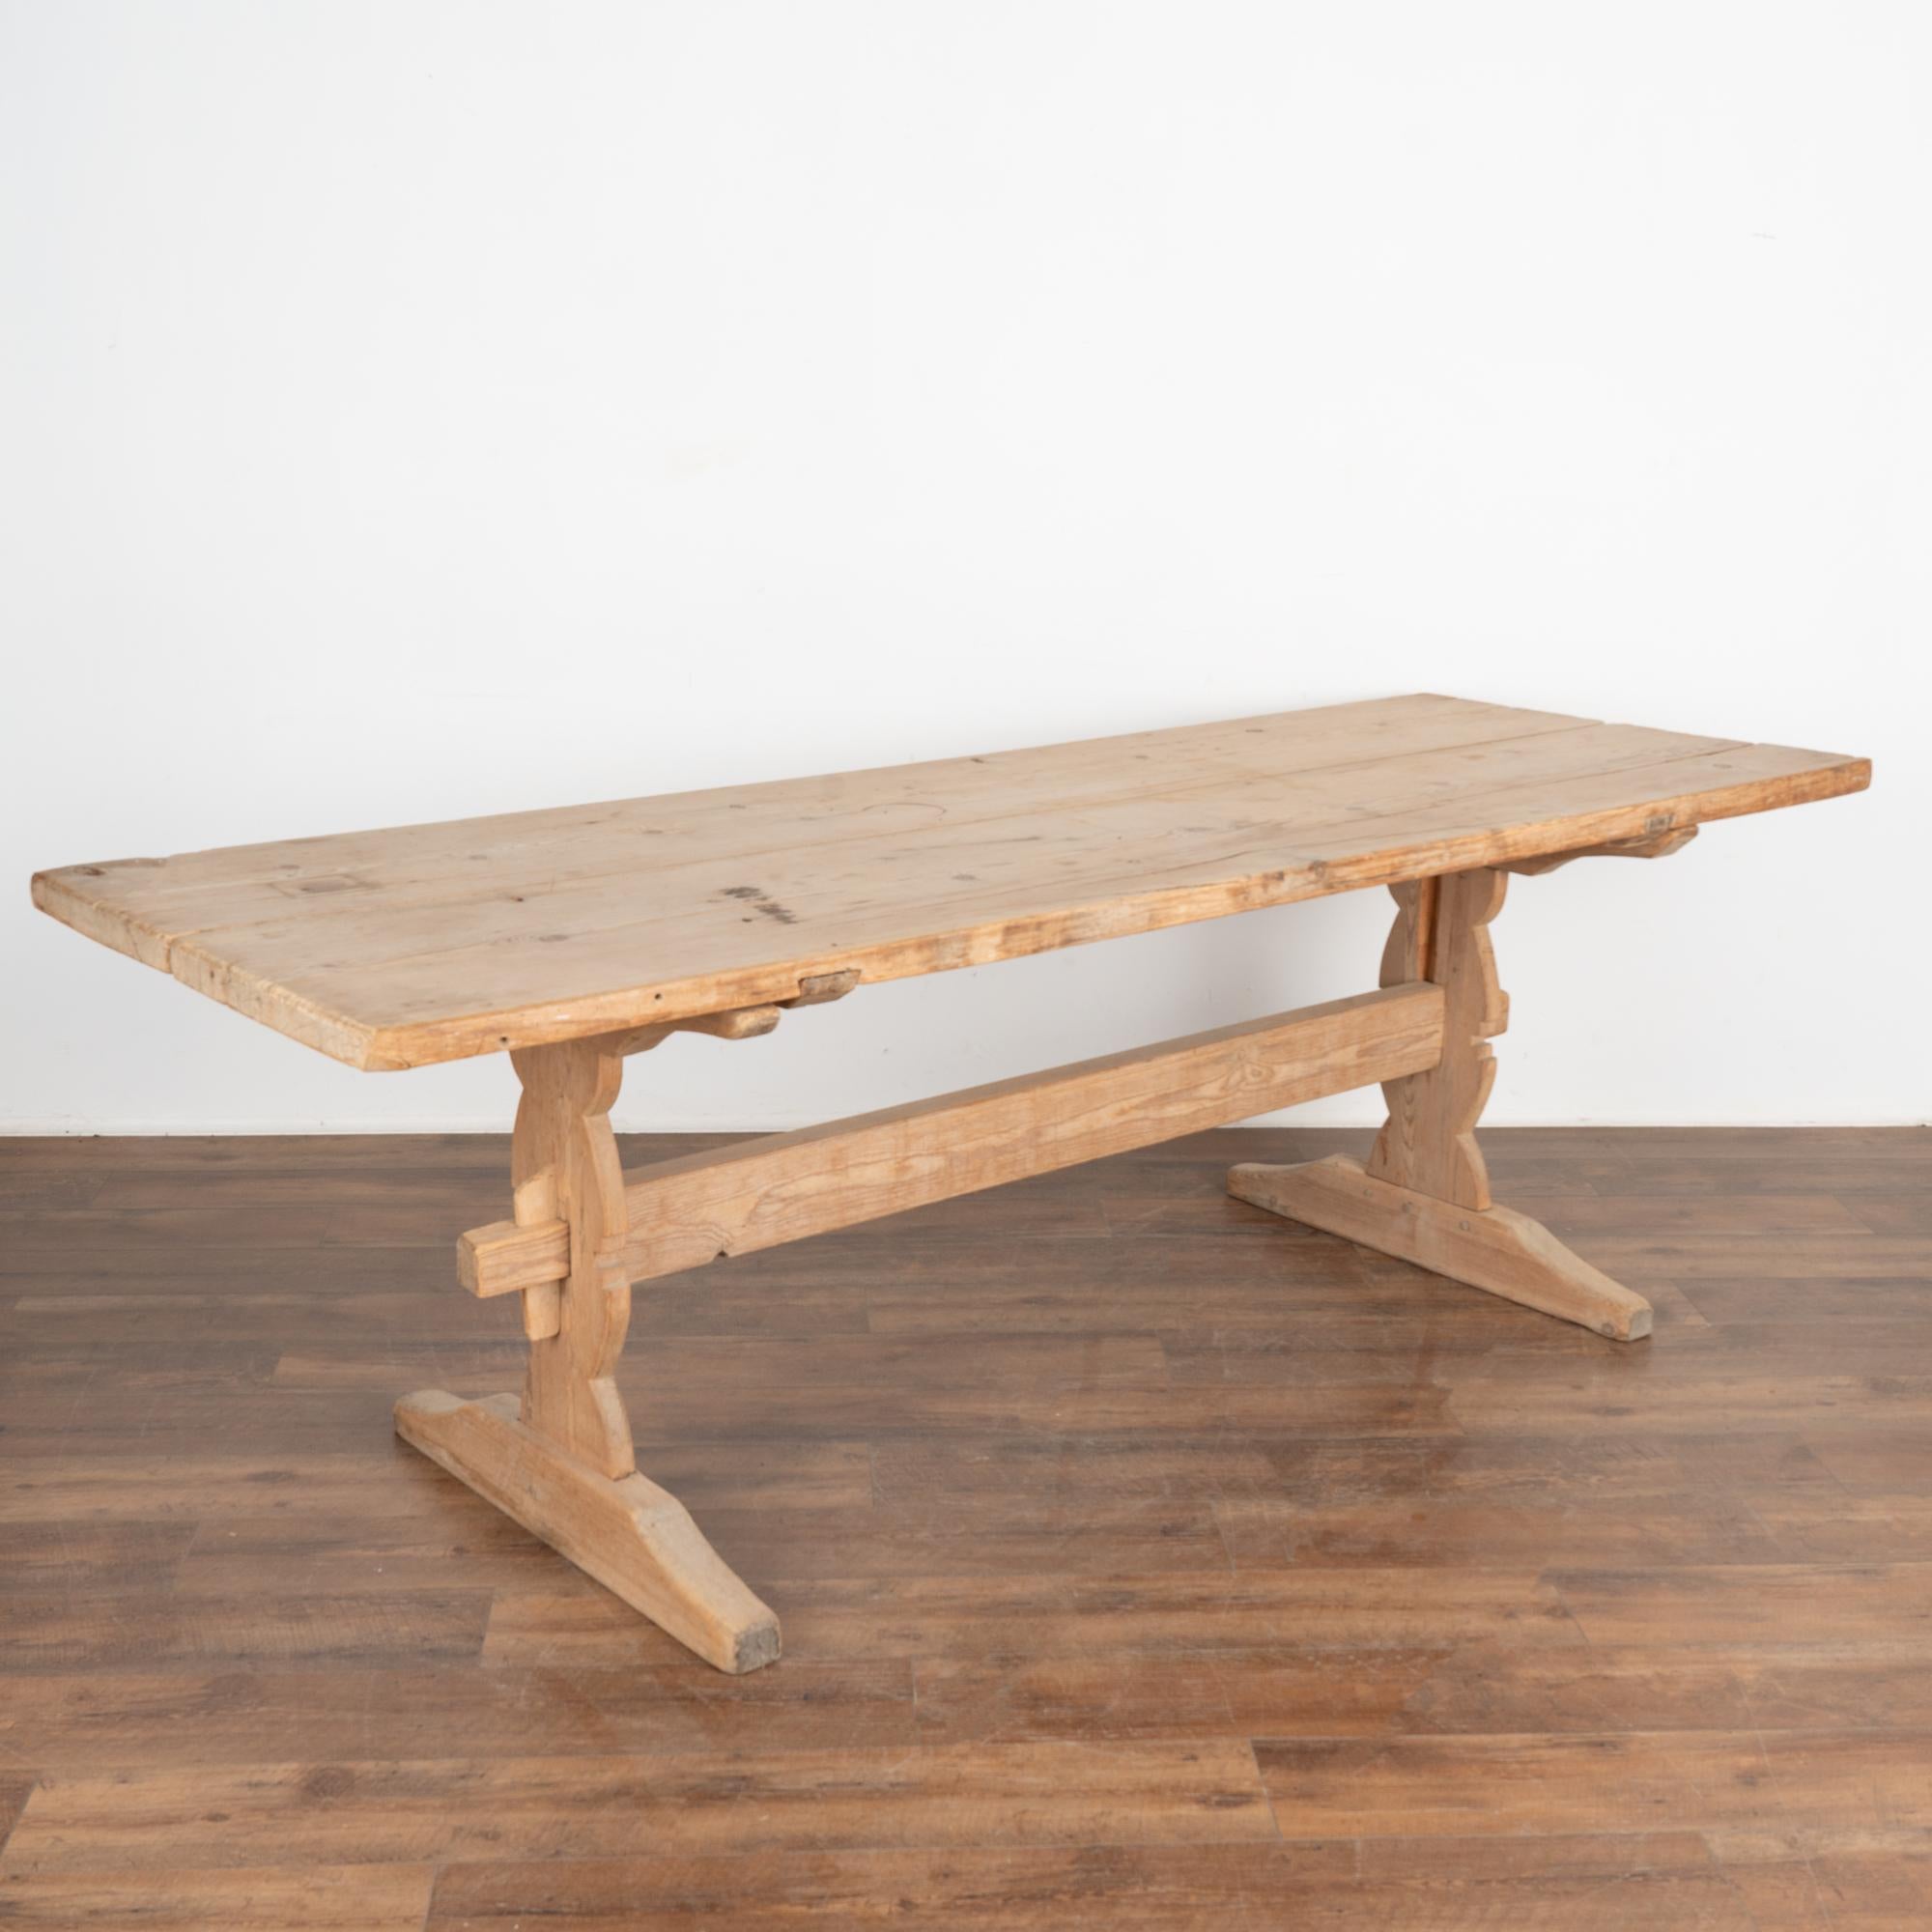 This wonderful old farm table from the Swedish countryside is almost 8' long. The natural pine shows off a warm and worn patina deepened through generations of use. 
There is a 17